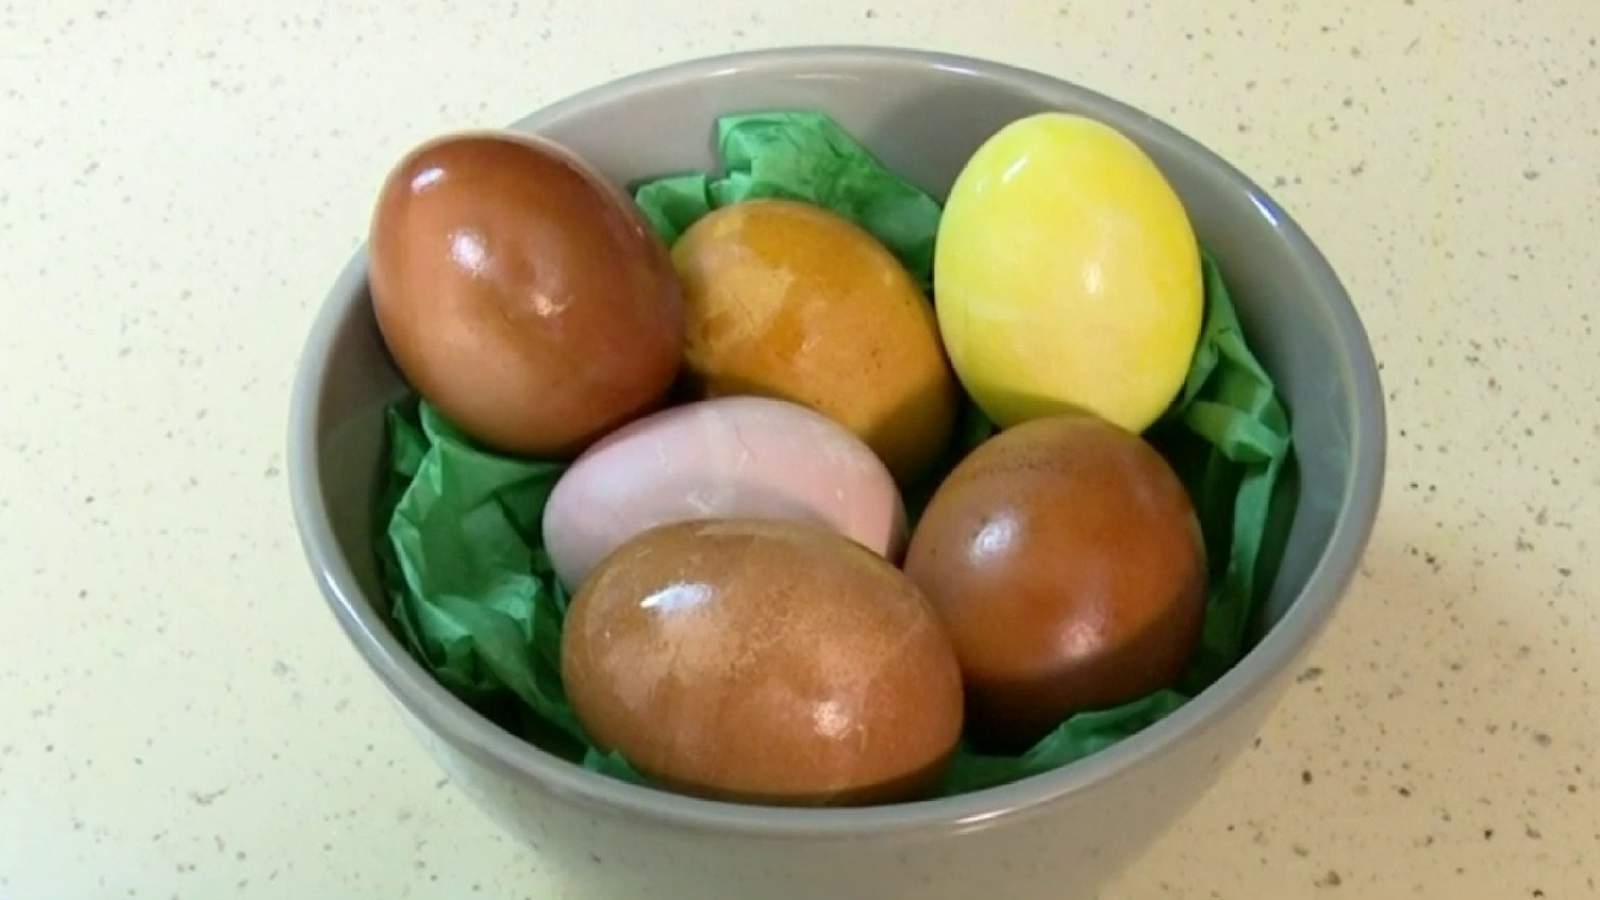 Make colorful dyed eggs naturally with items from your kitchen